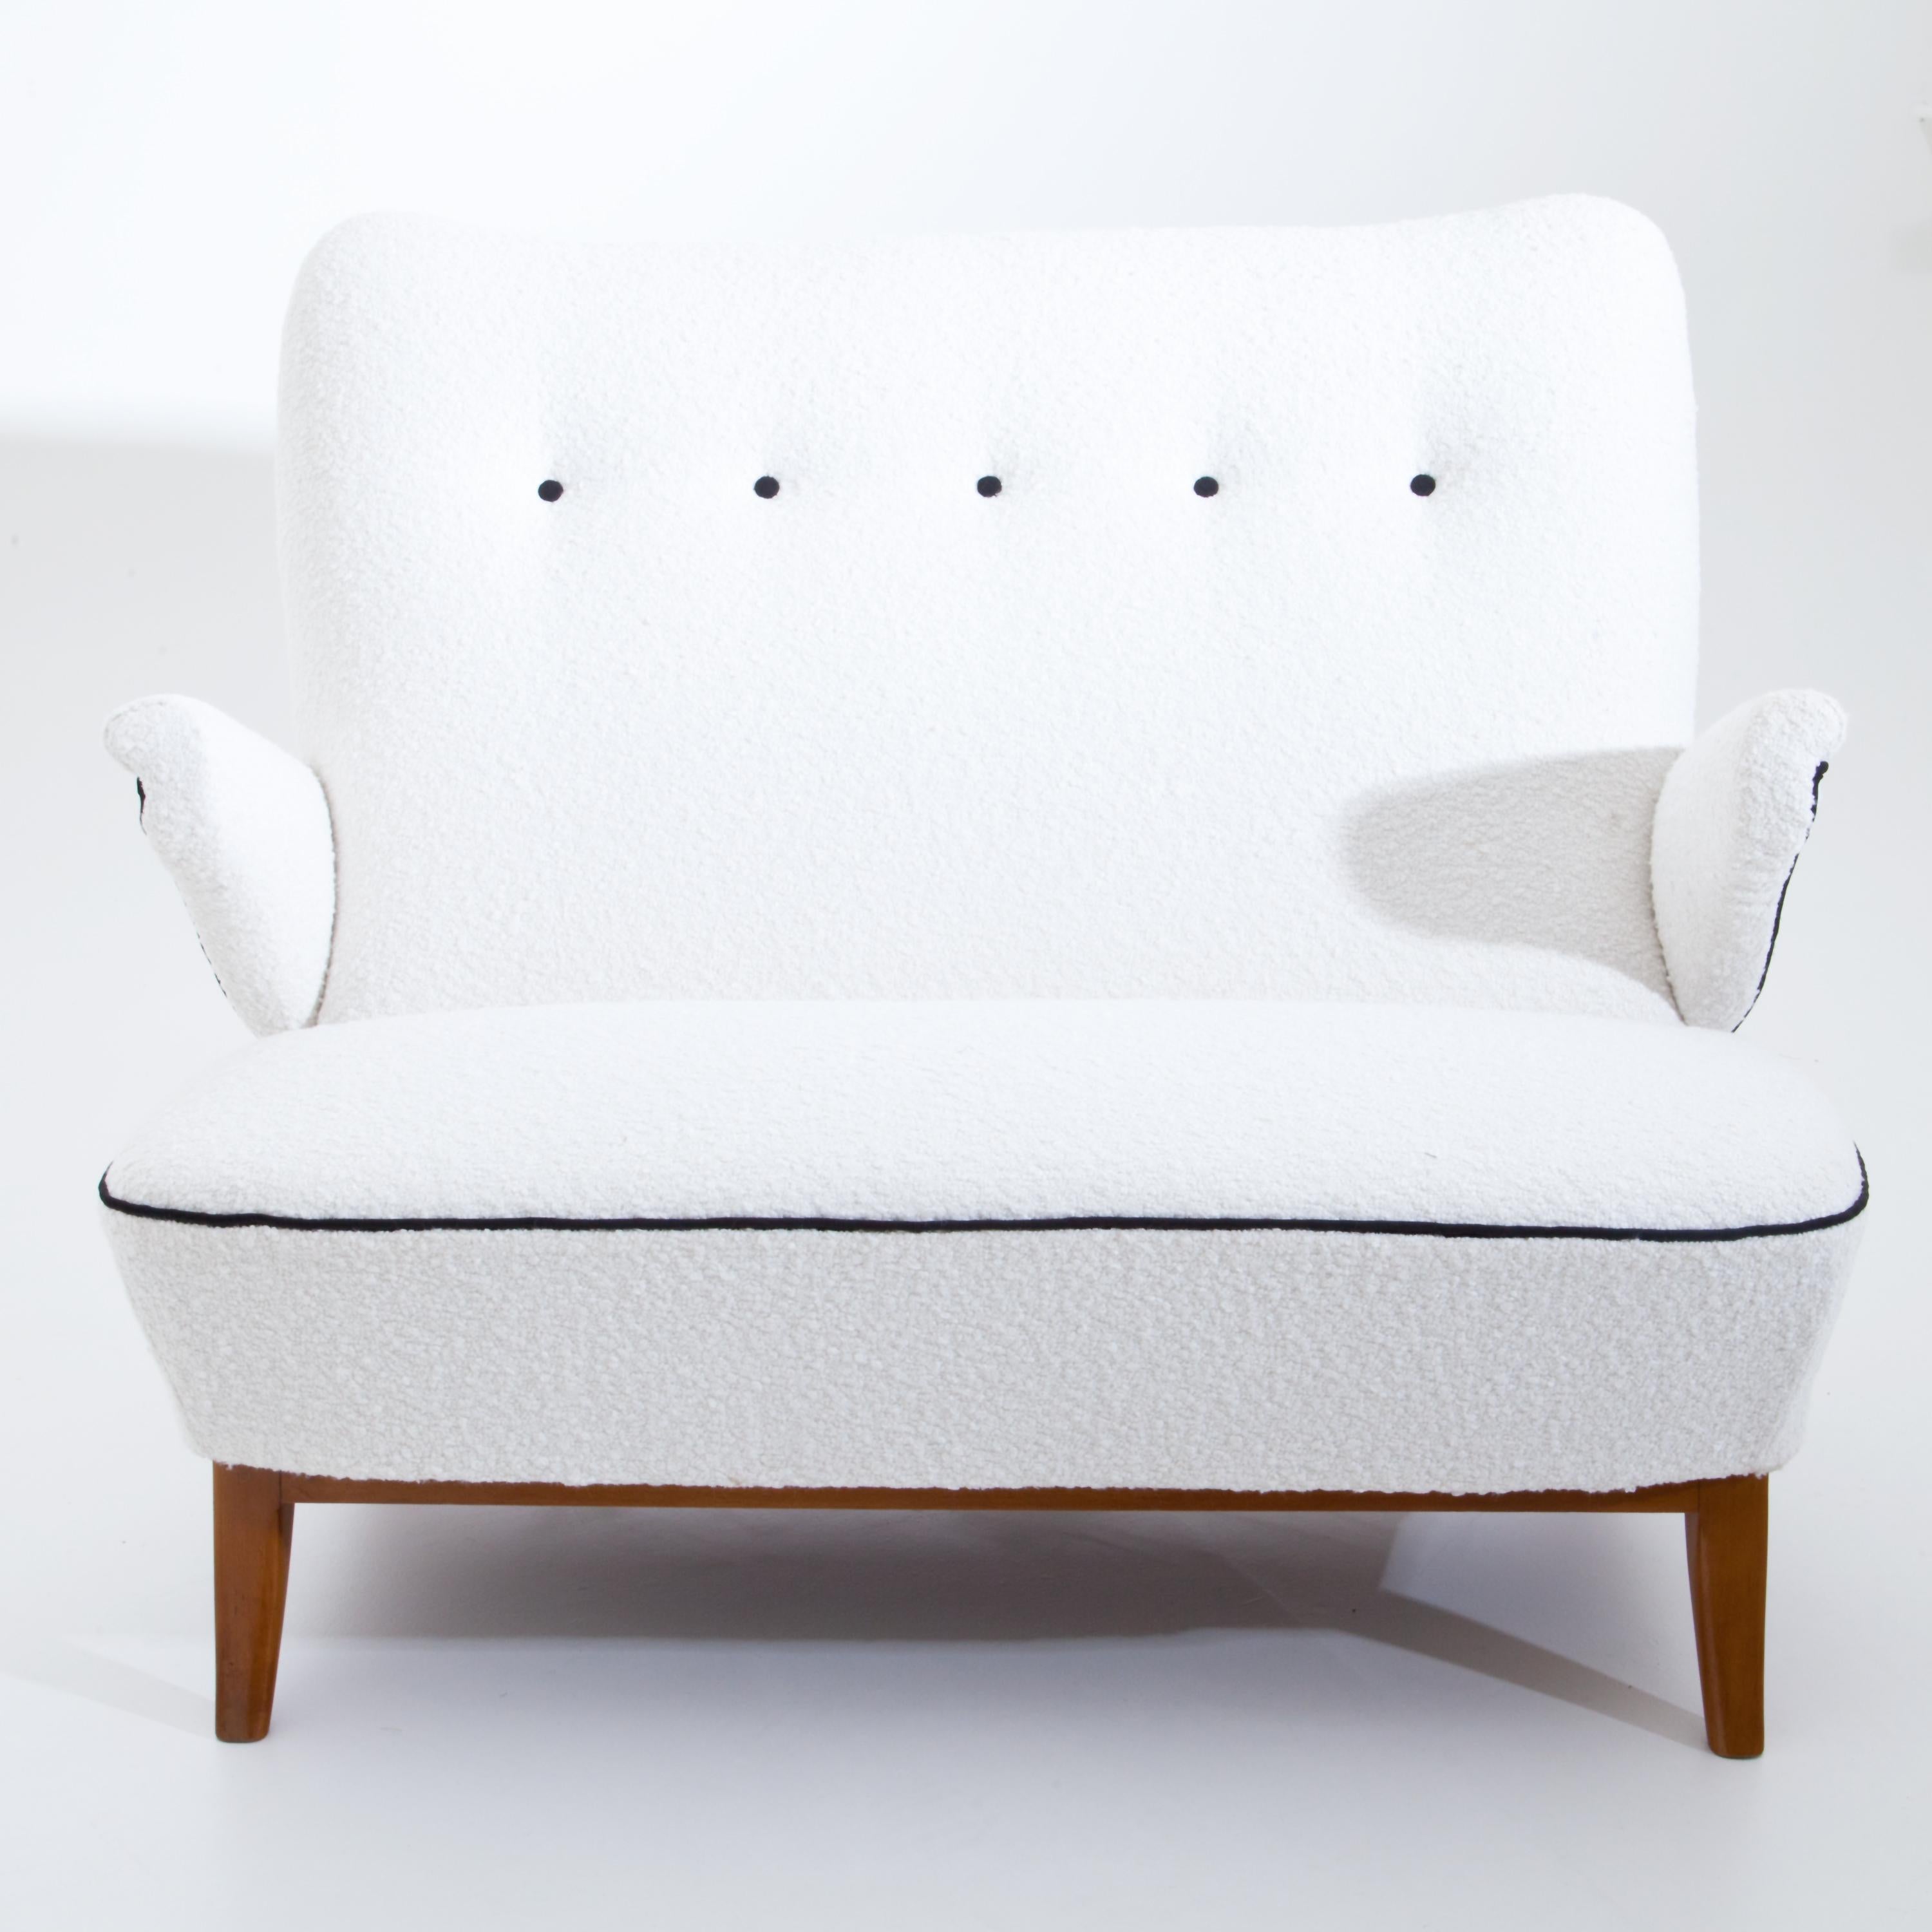 Midcentury sofa or love seat on curved wooden feet. The strongly inclined, rounded backrest and the seat and armrests are newly covered with a white bouclé fabric with black piping and buttons. The backrest can be tilted in two stages by simply